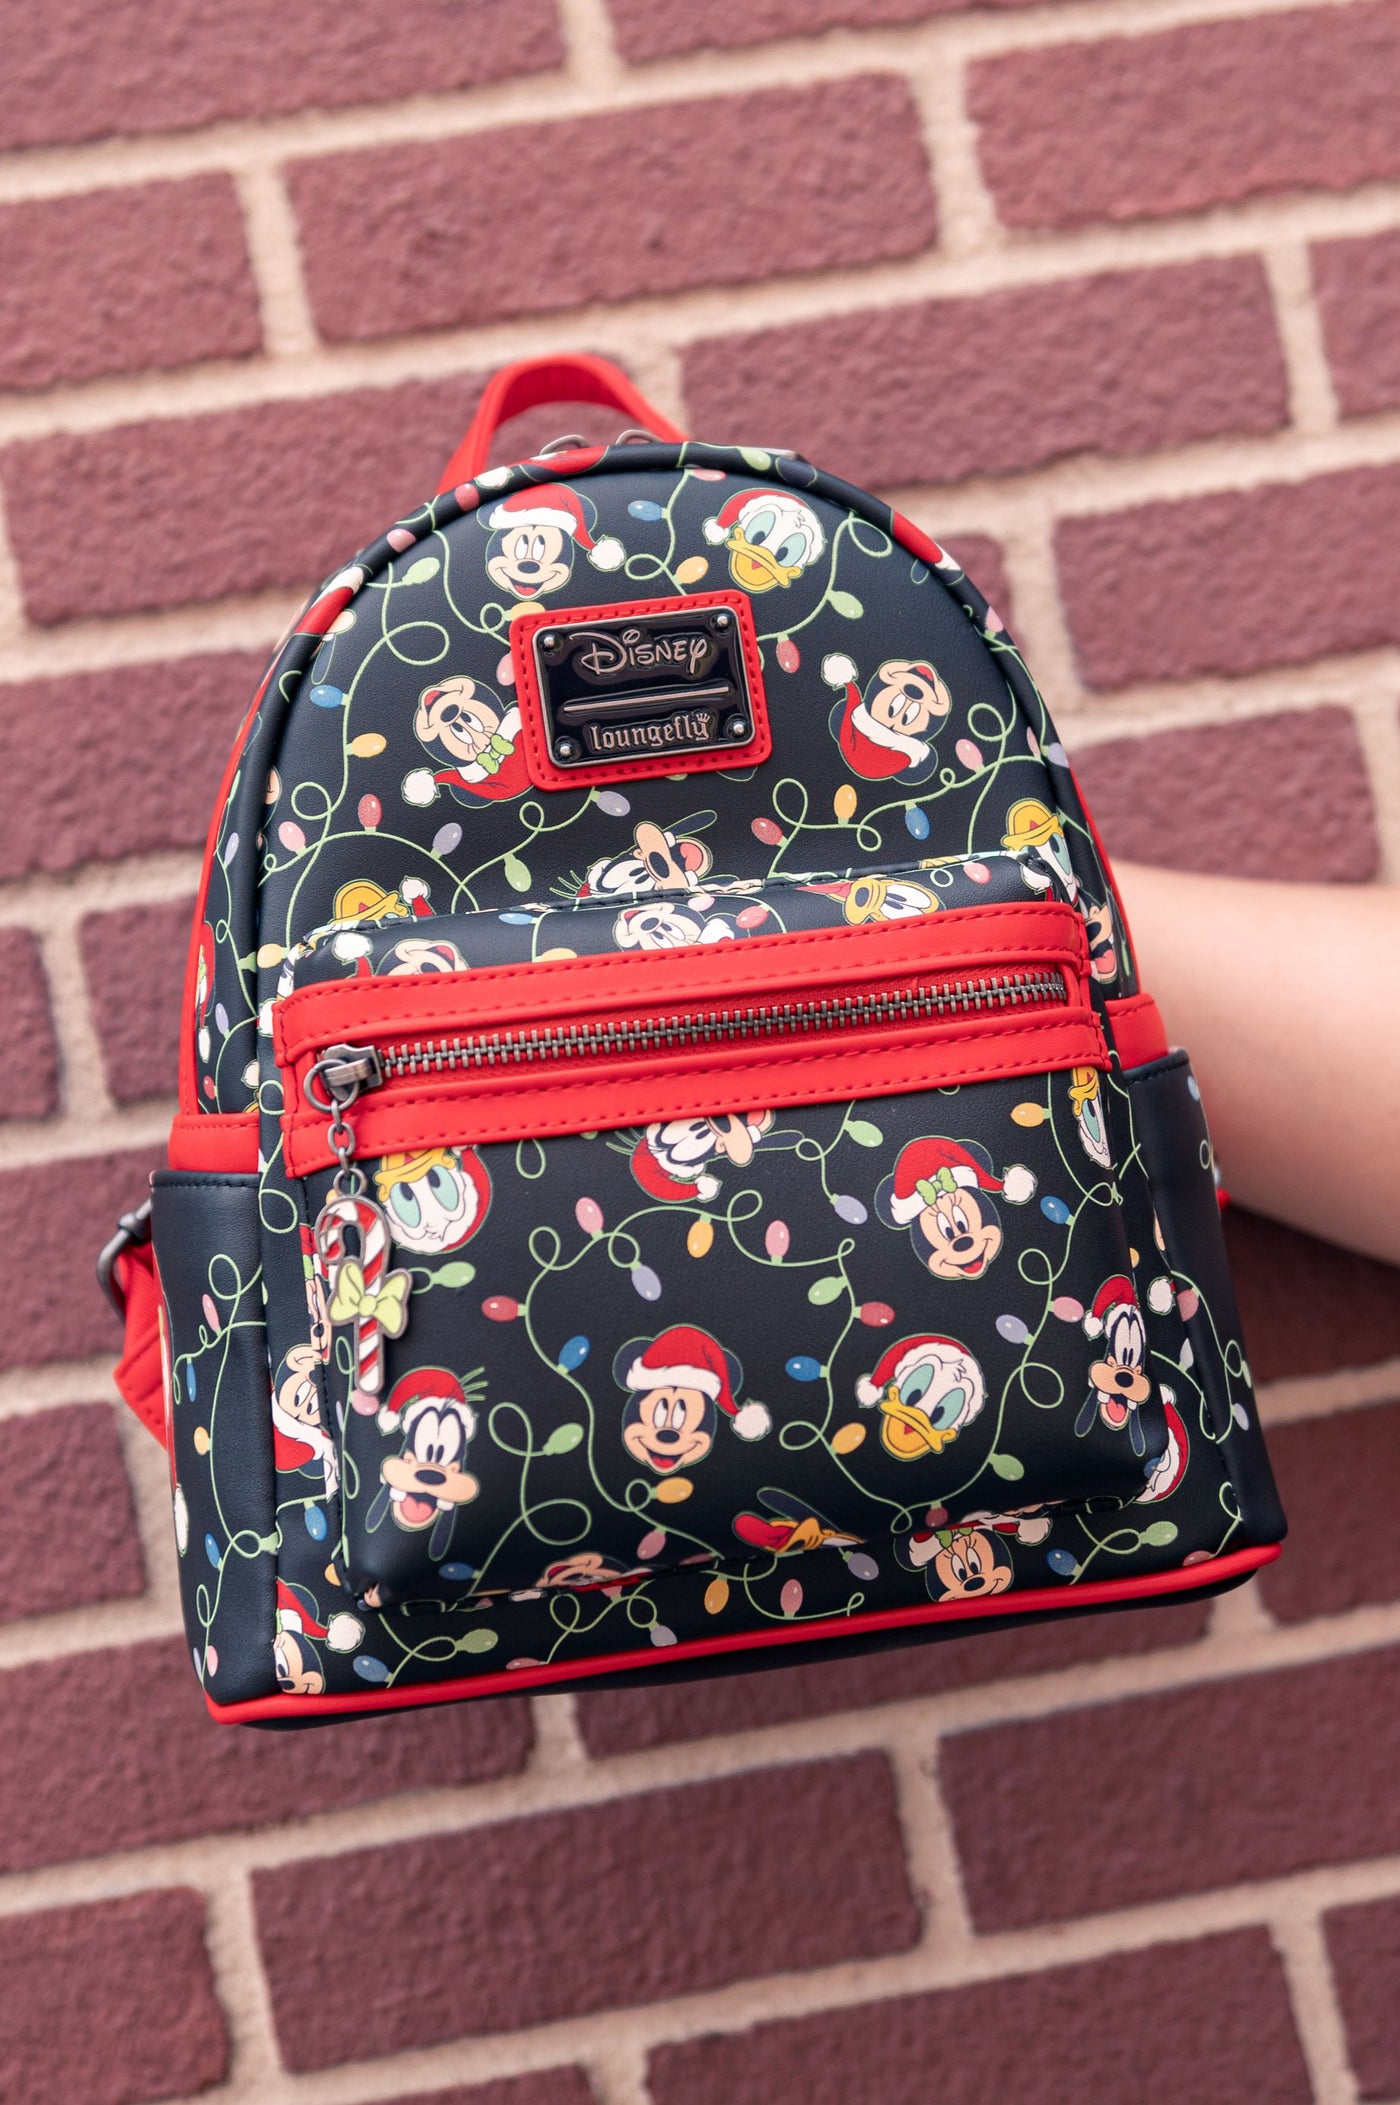 707 Street Exclusive - Loungefly Disney Glow in the Dark Santa Mickey and Friends Christmas Lights Mini Backpack - IRL Front